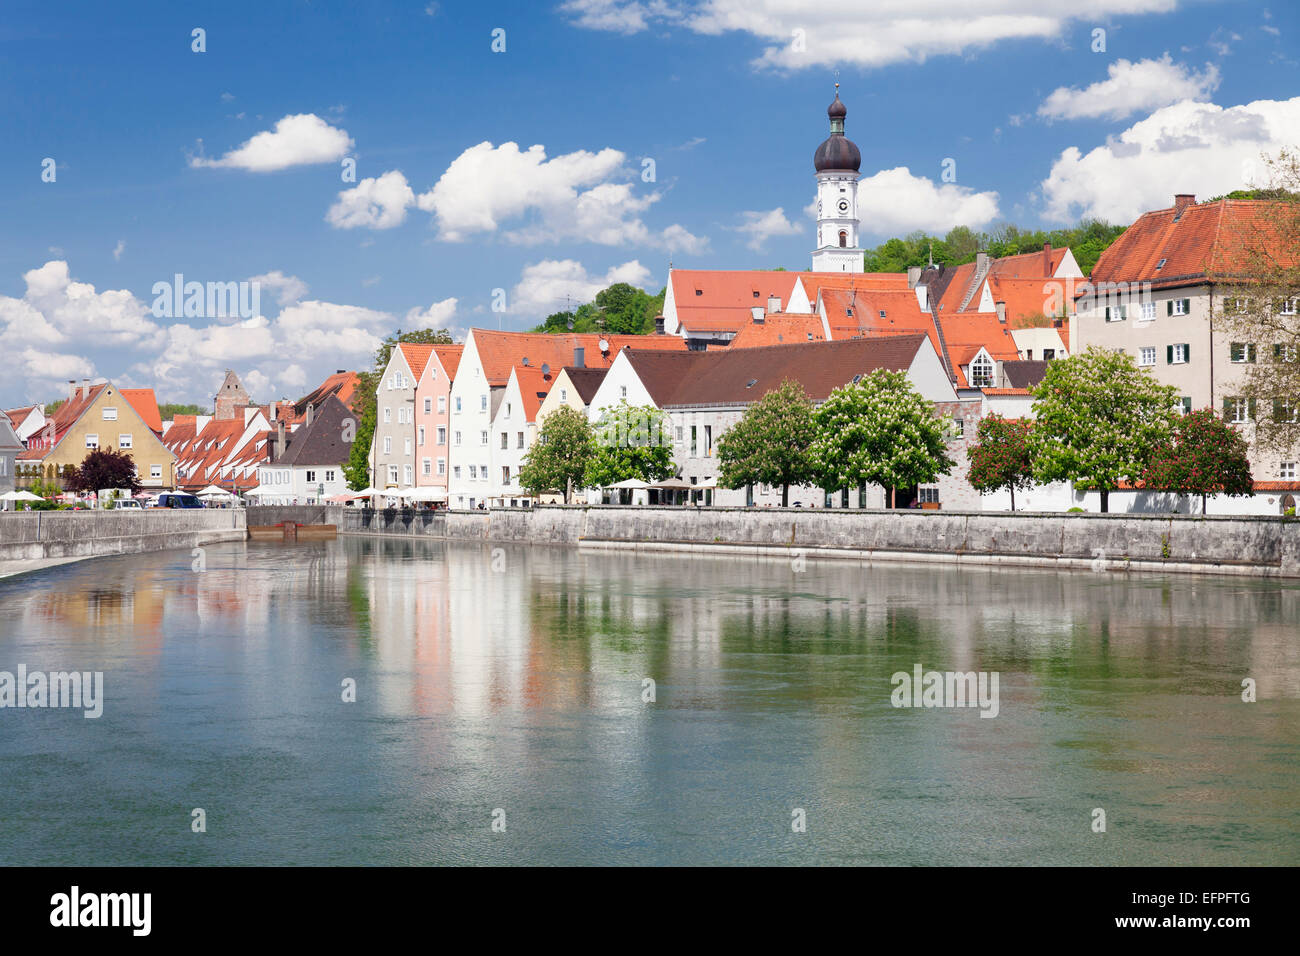 Old town of Landsberg am Lech, Lech River, Bavaria, Germany, Europe Stock Photo